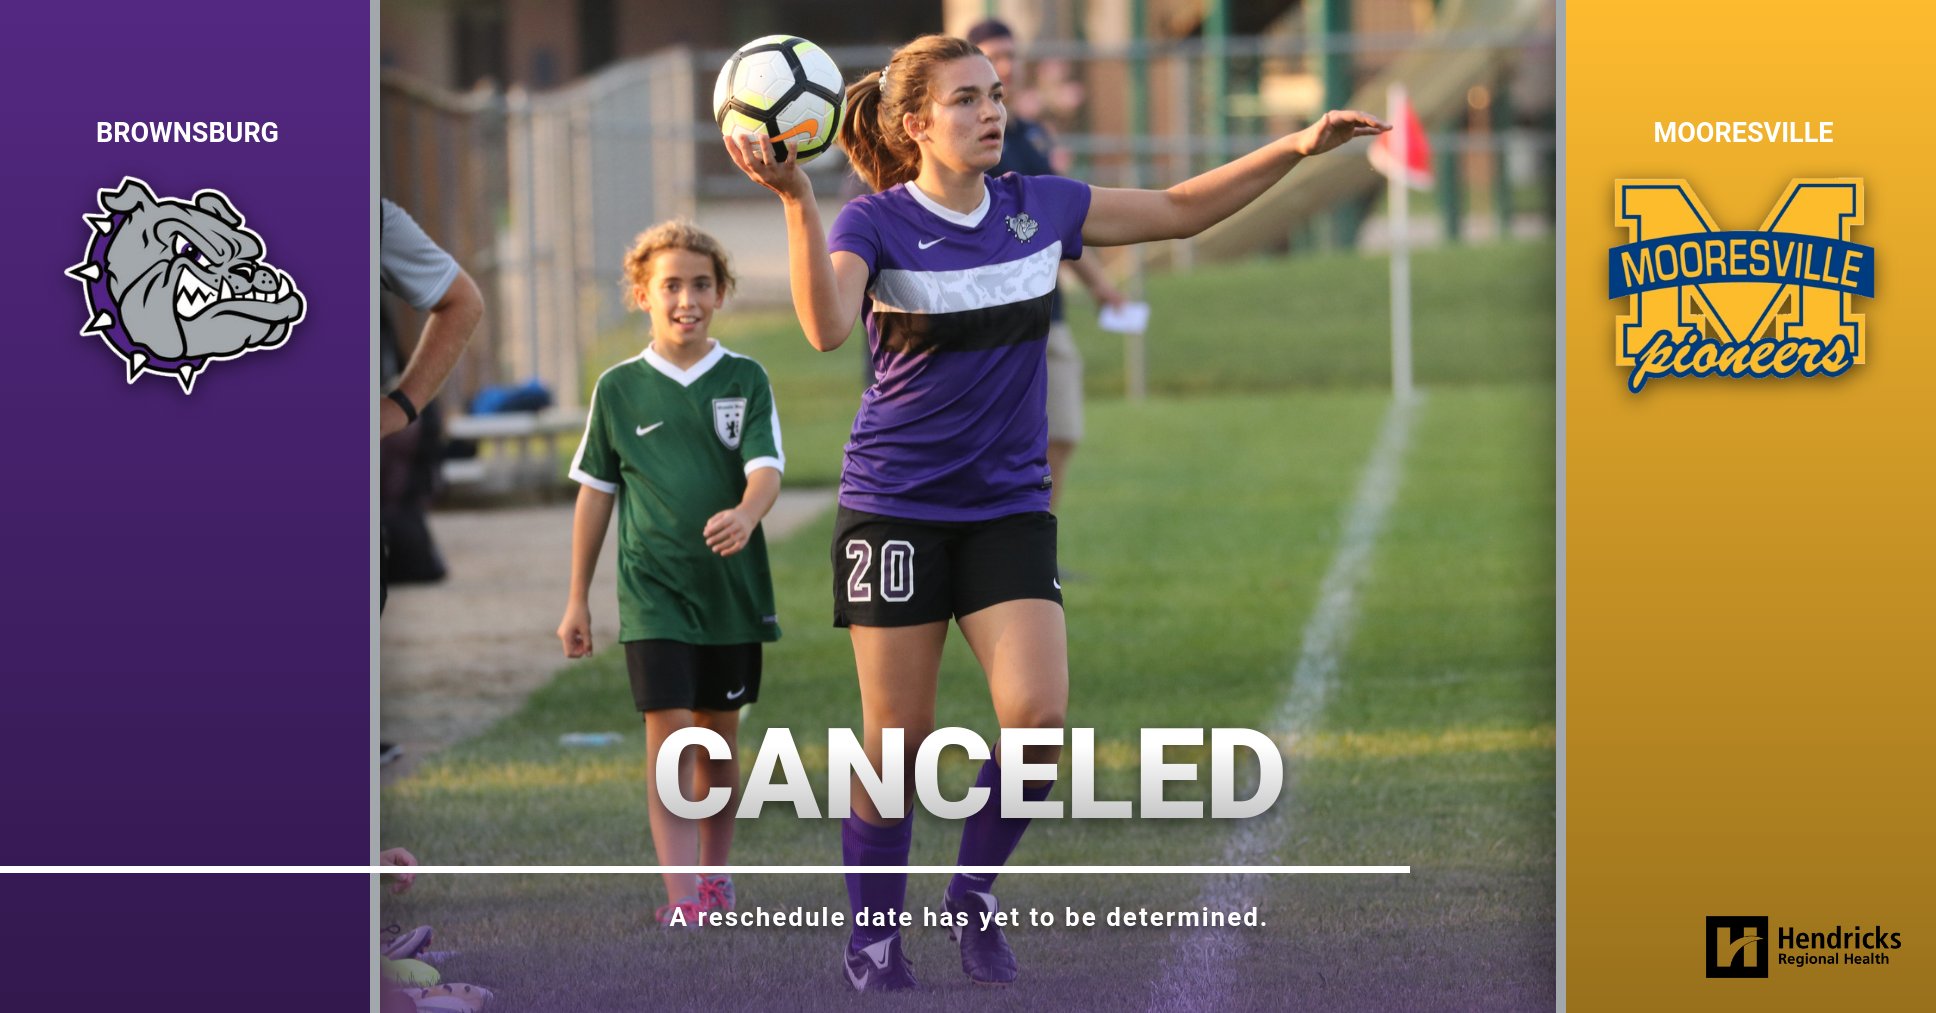 Girls' soccer season opener vs Mooresville canceled due to weather